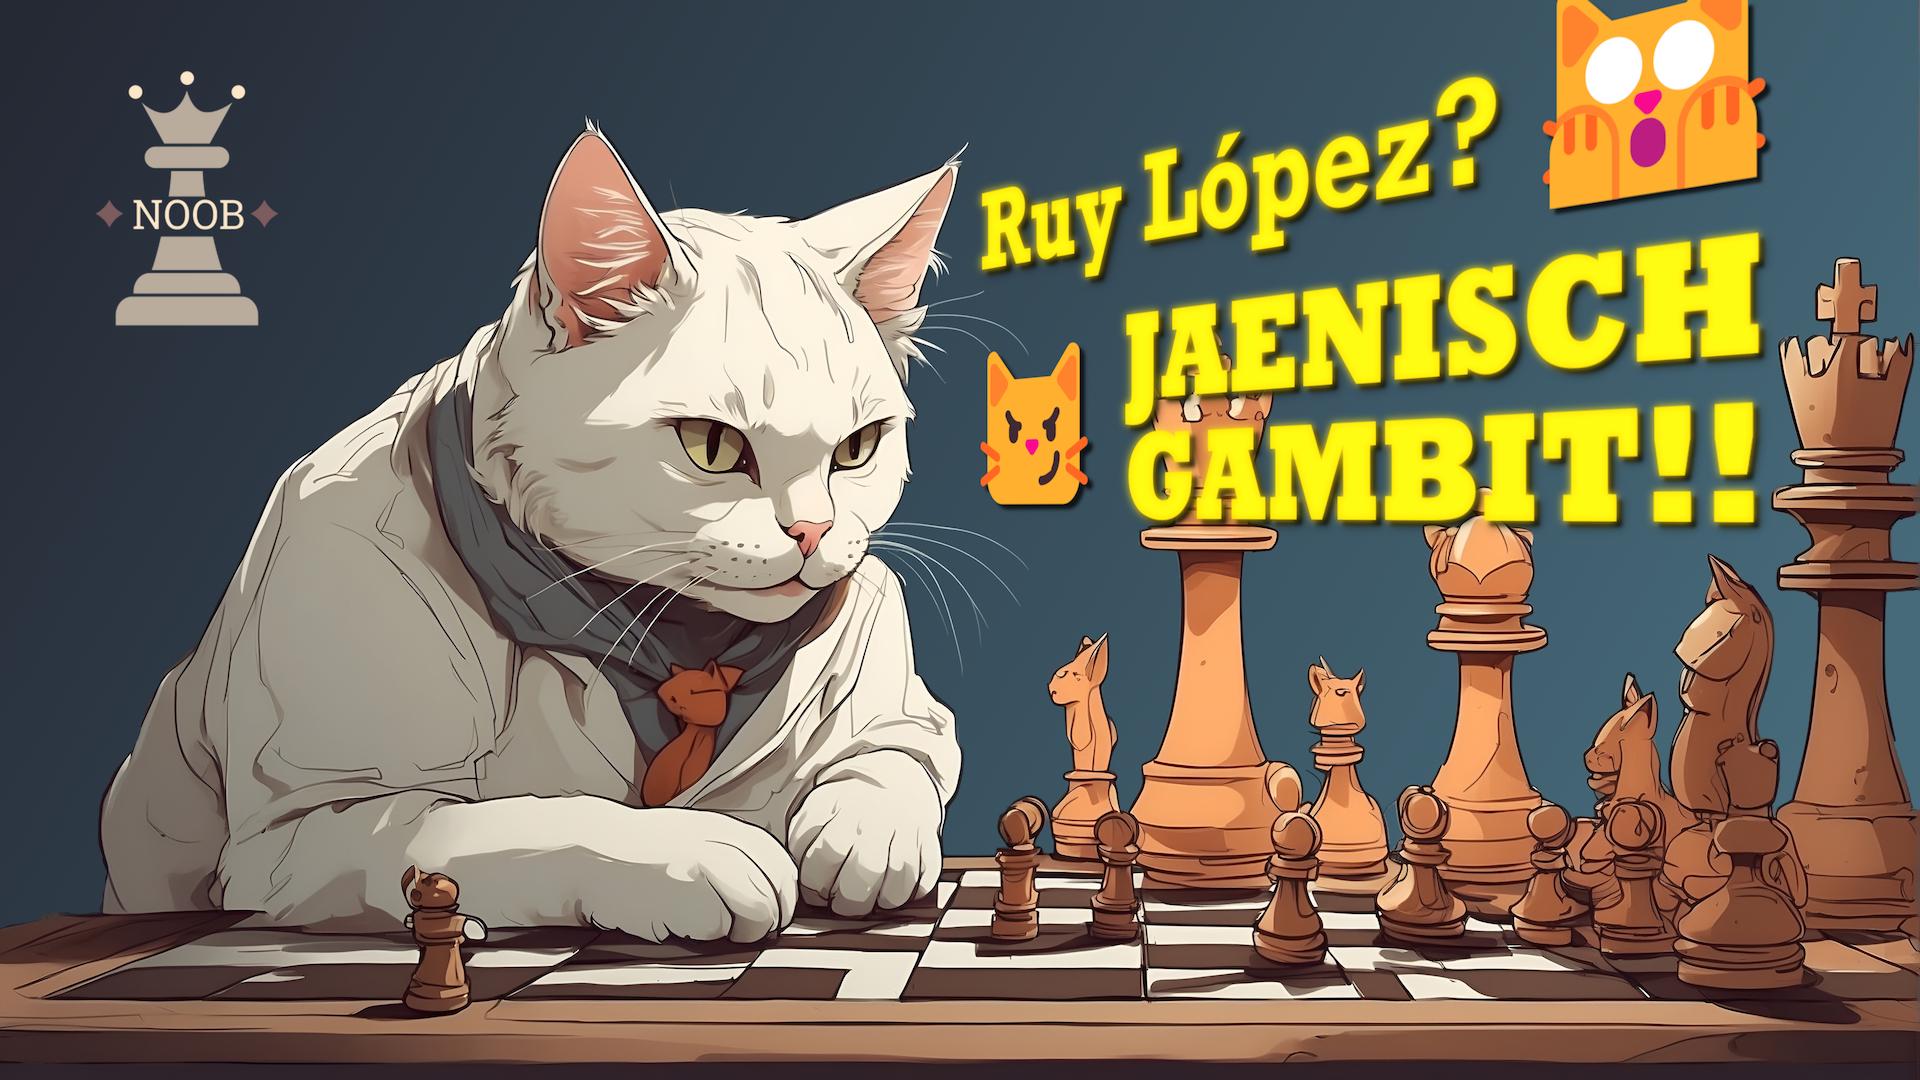 Jaenisch Gambit Accepted  CRUSHING the Ruy Lopez Opening! 